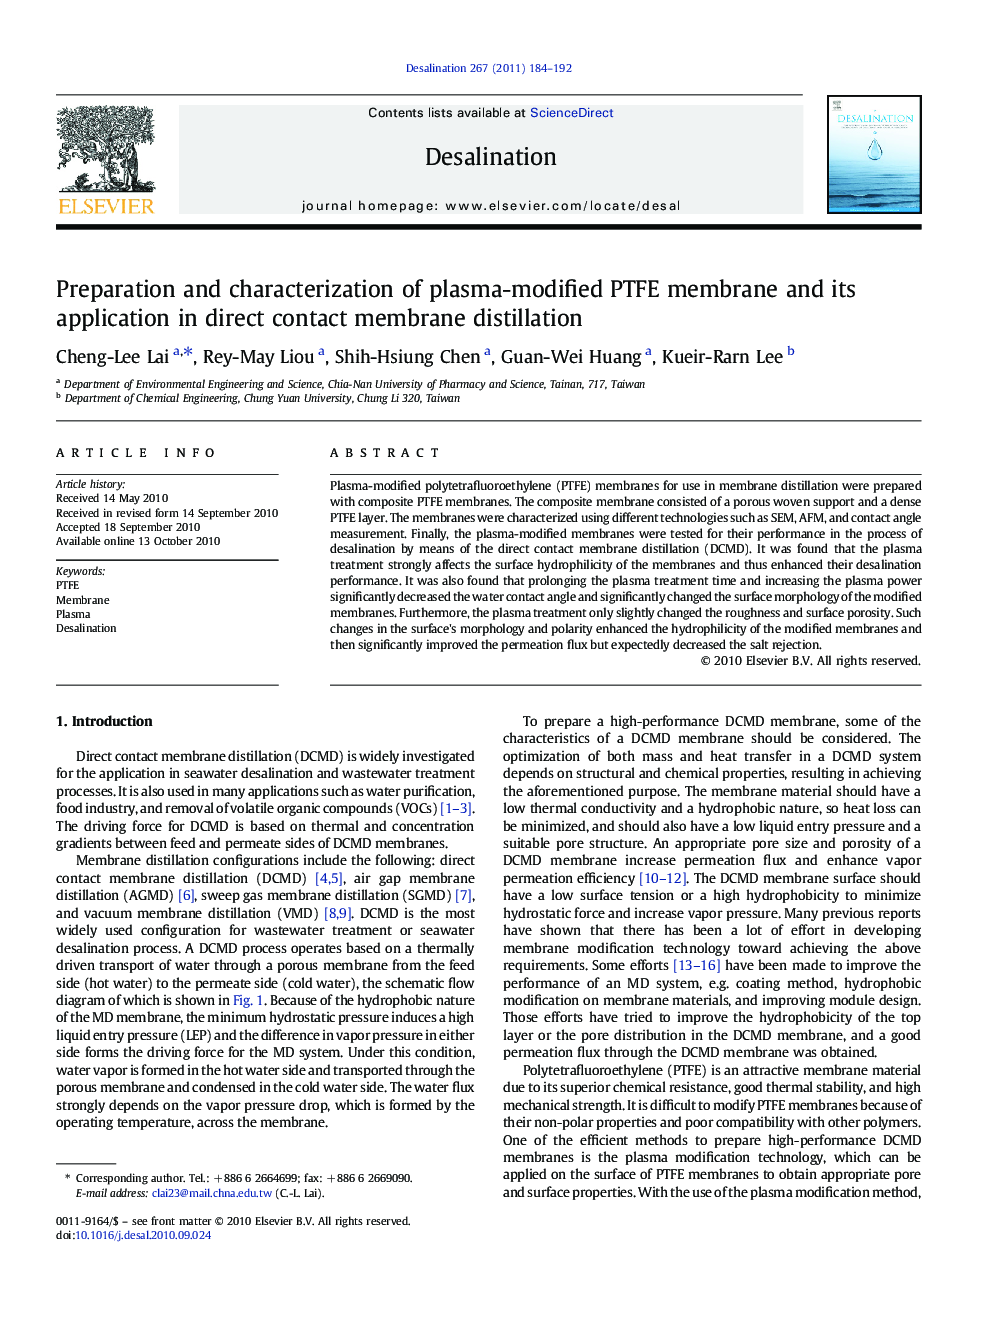 Preparation and characterization of plasma-modified PTFE membrane and its application in direct contact membrane distillation